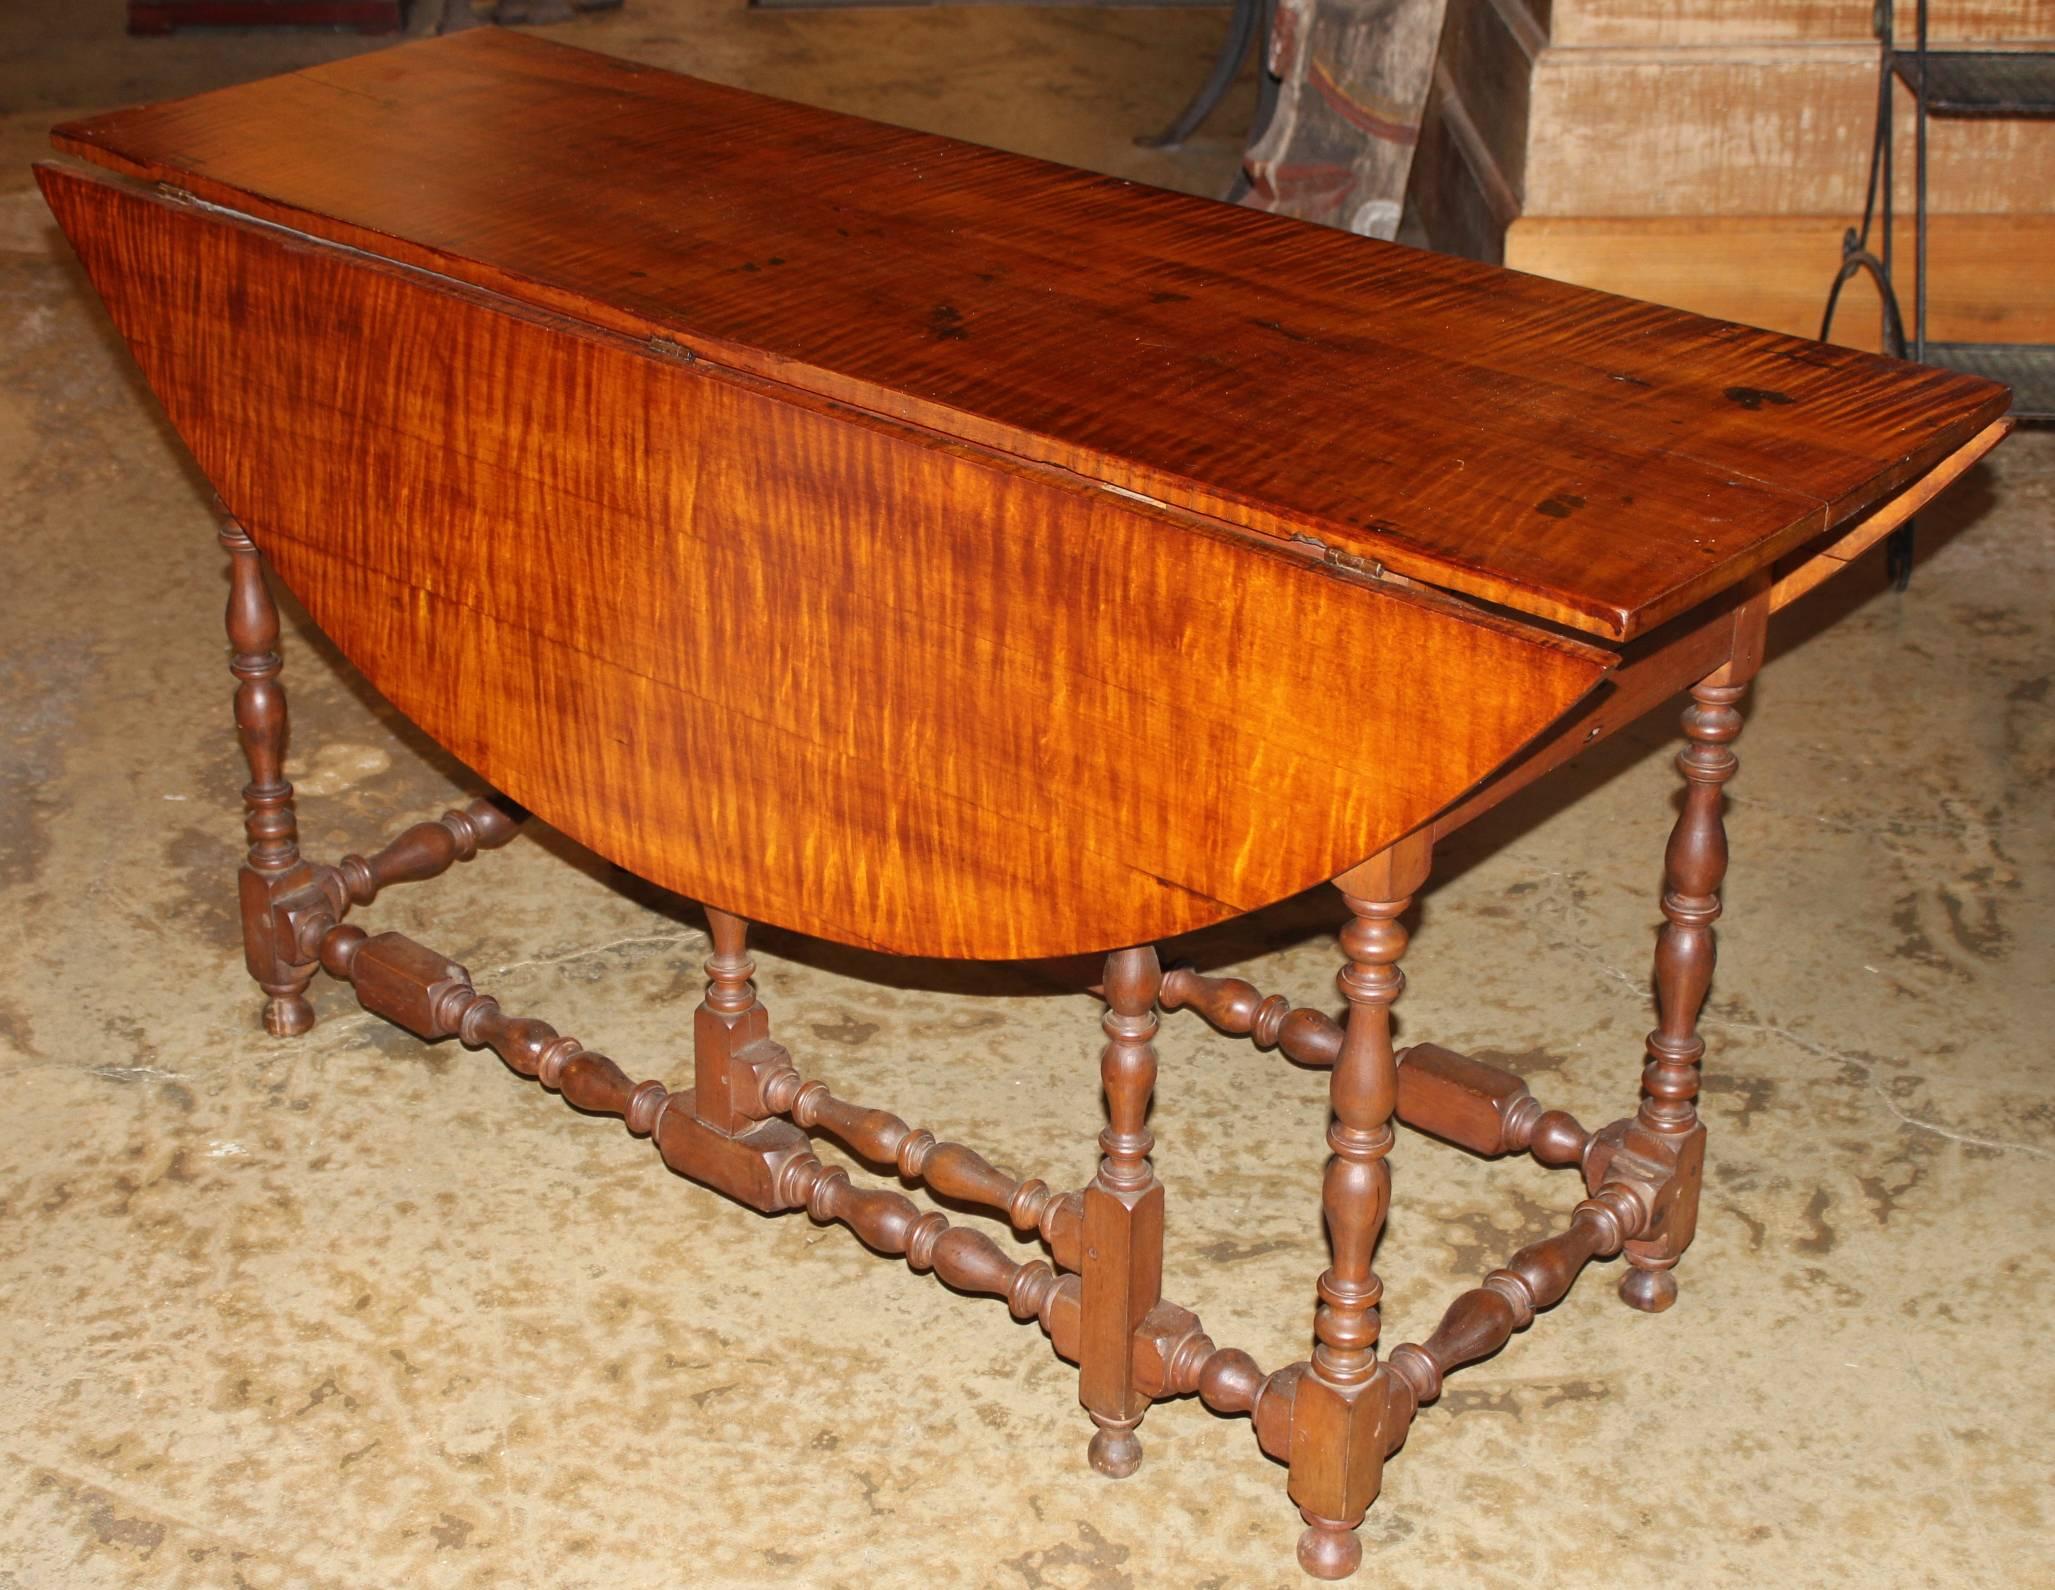 A 19th century adapted William and Mary style American gate leg table with striking tiger maple oval top with nicely turned gate legs and a fitted drawer on each end, in very good overall condition, with restorations, some minor losses and